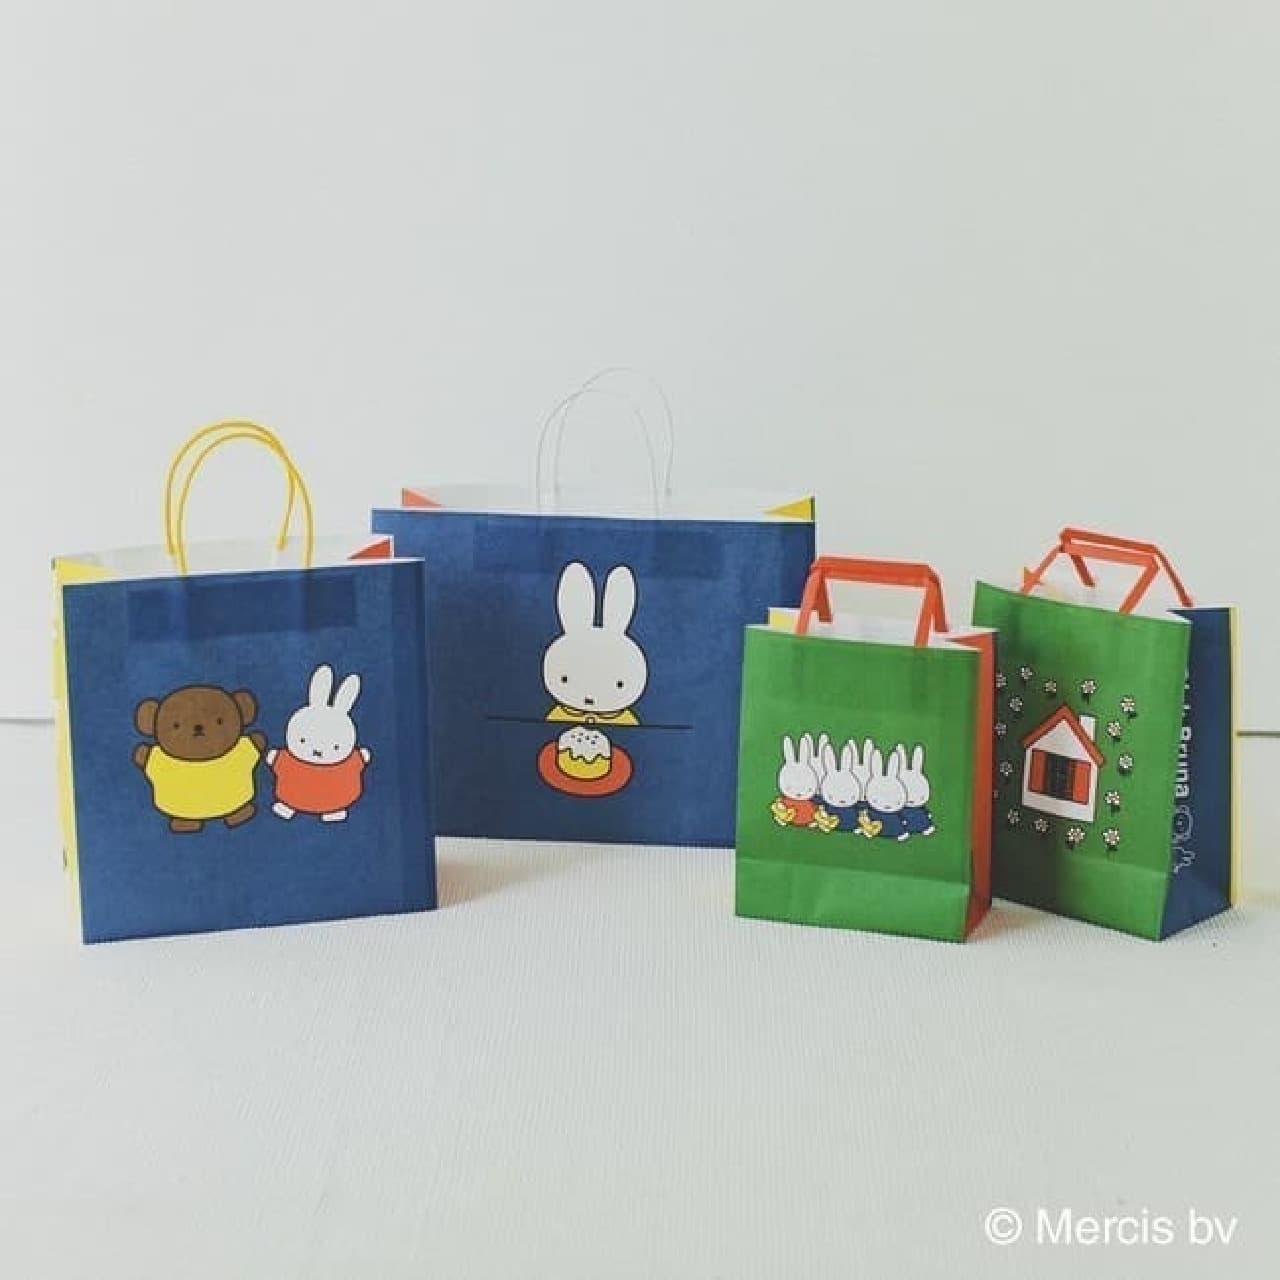 Dick Bruna x studio CLIP is back again this year! Miffy pattern eco bag, pouch, etc.